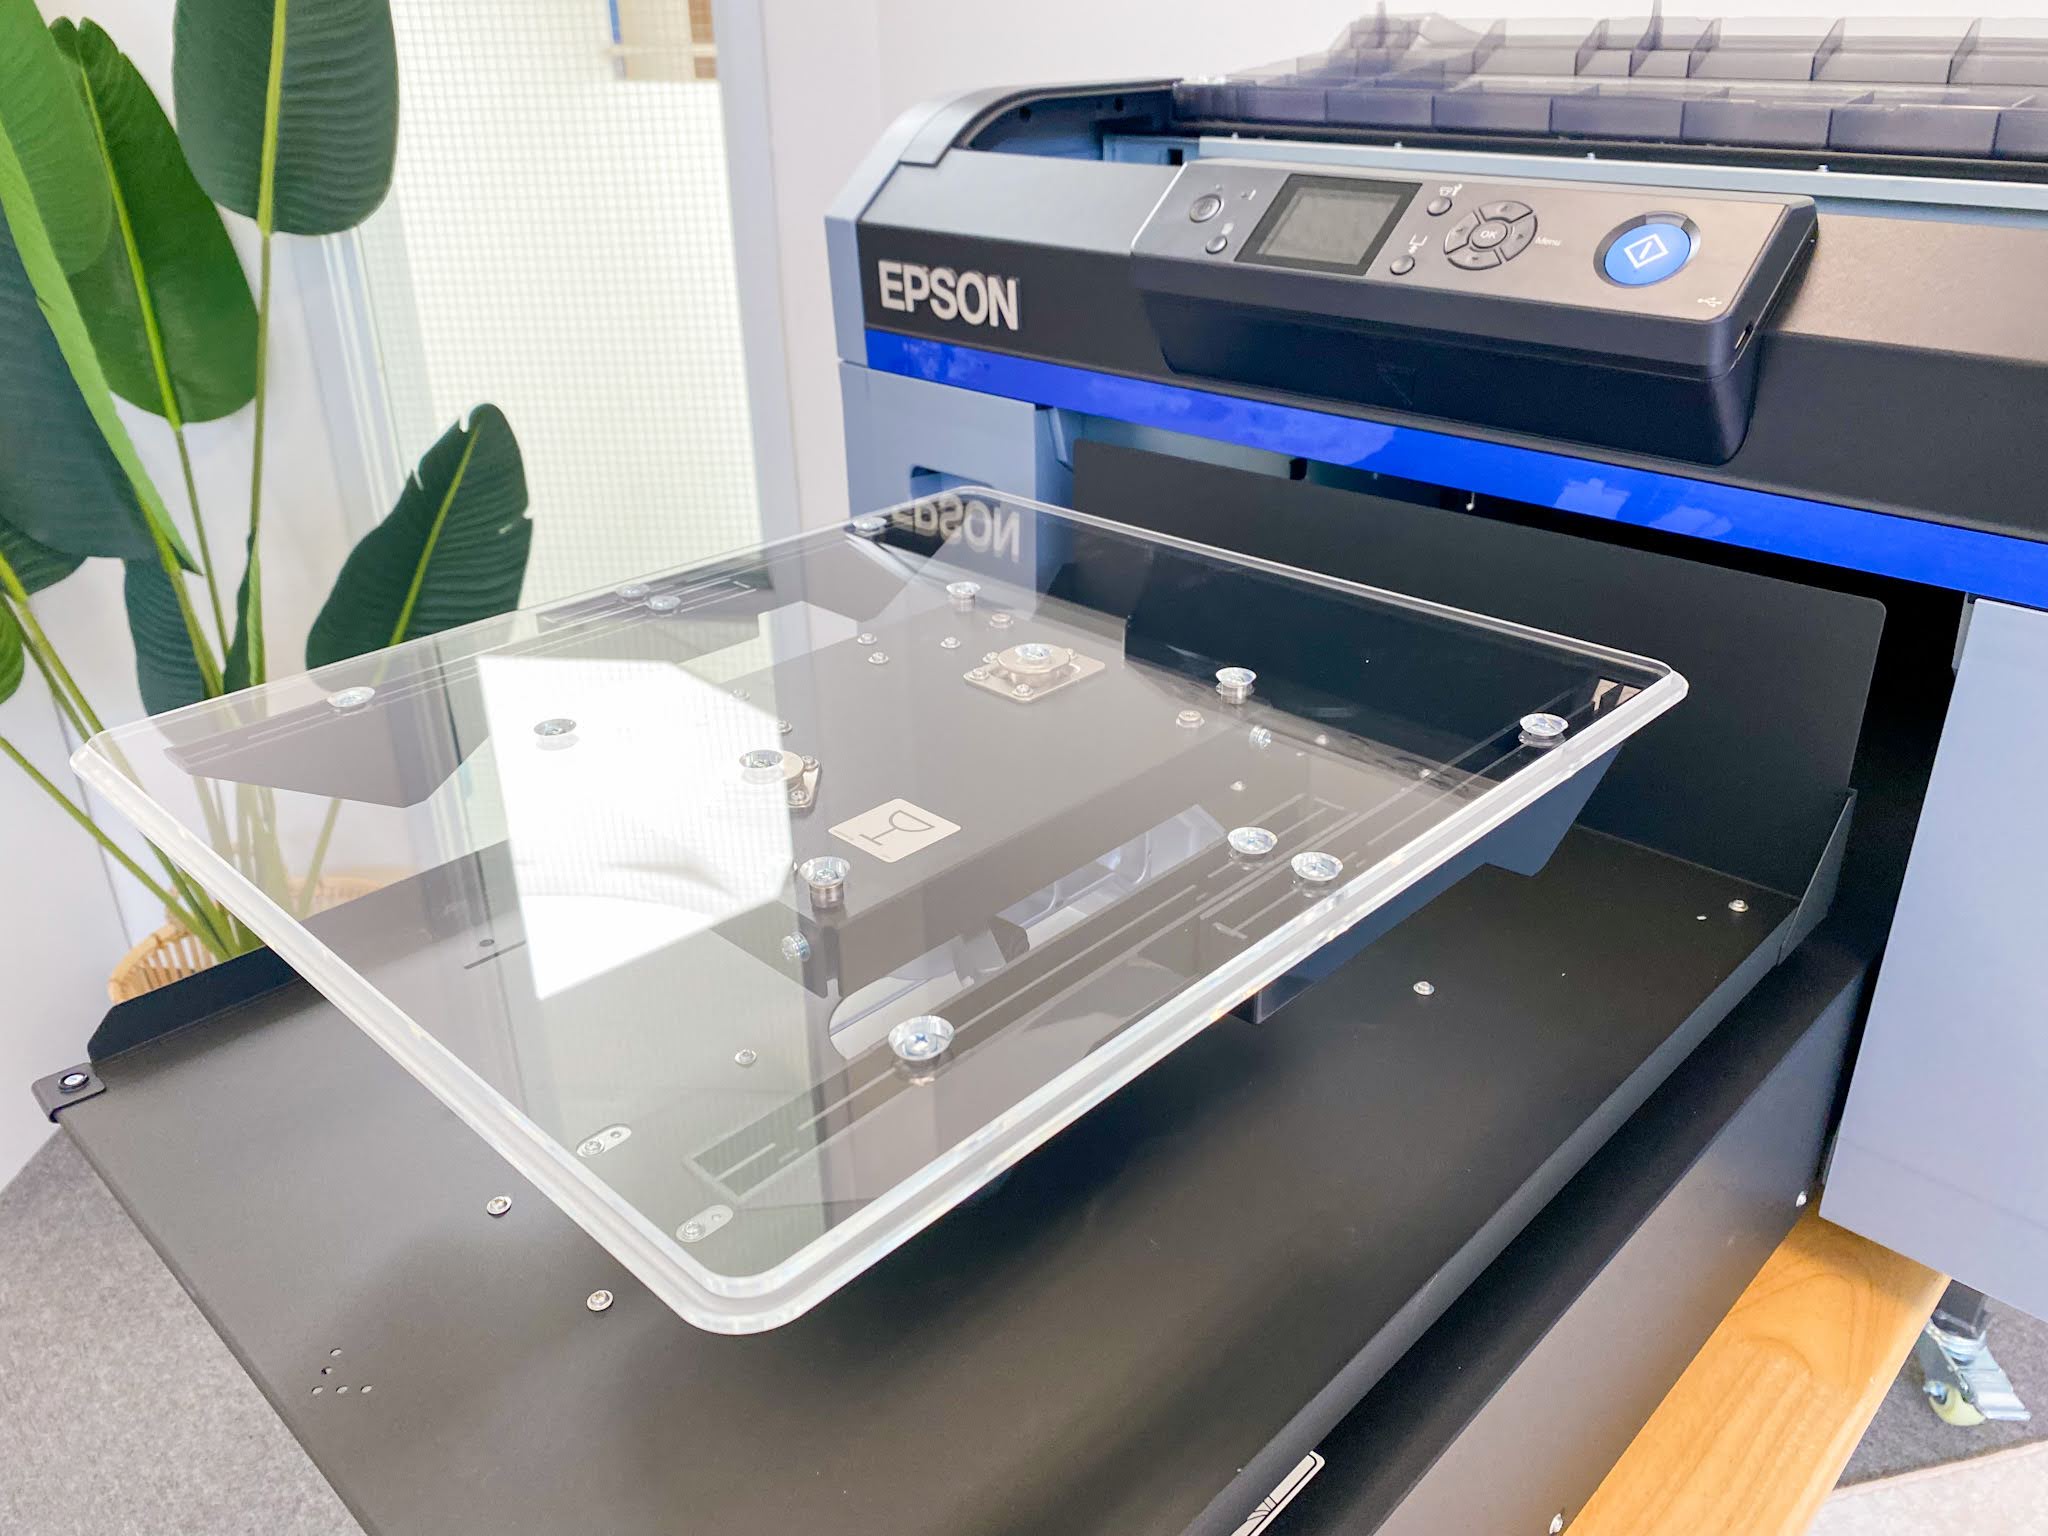 Best Epson F2100 DTF Settings for DTF Printing with Kodak DTF Film 